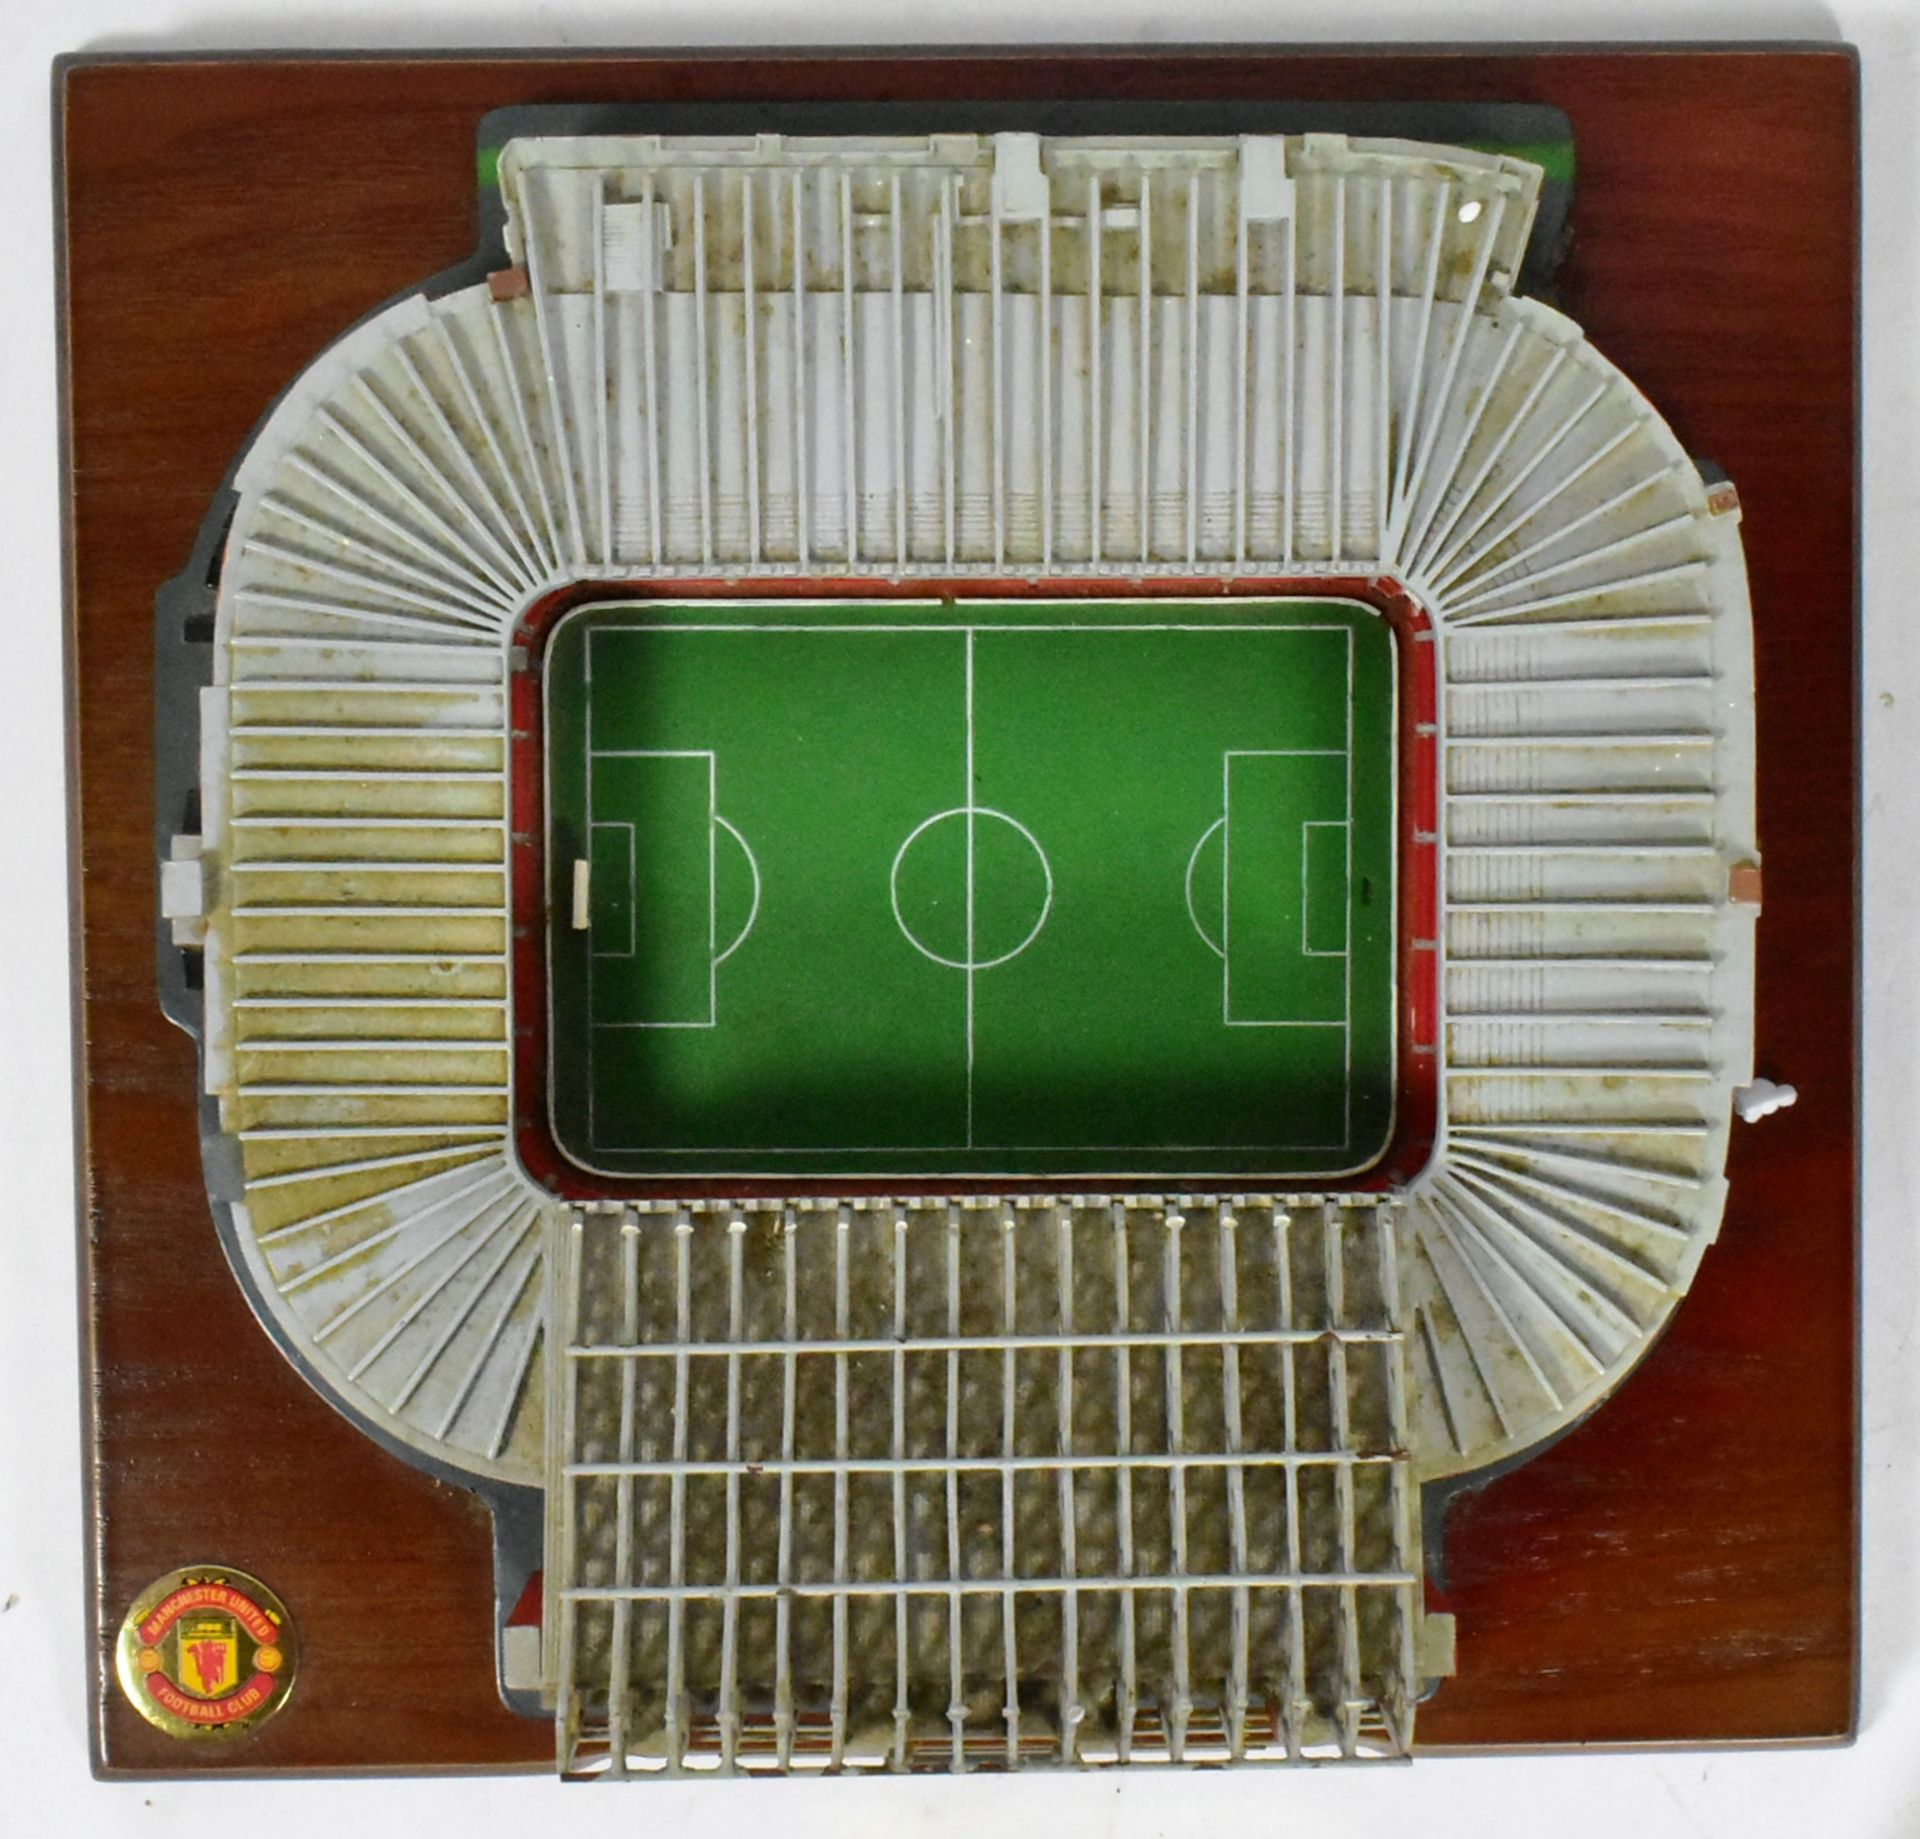 OFFICIAL MANCHESTER UNITED OLD TRAFFORD REPLICA STADIUM MODEL - Image 4 of 5